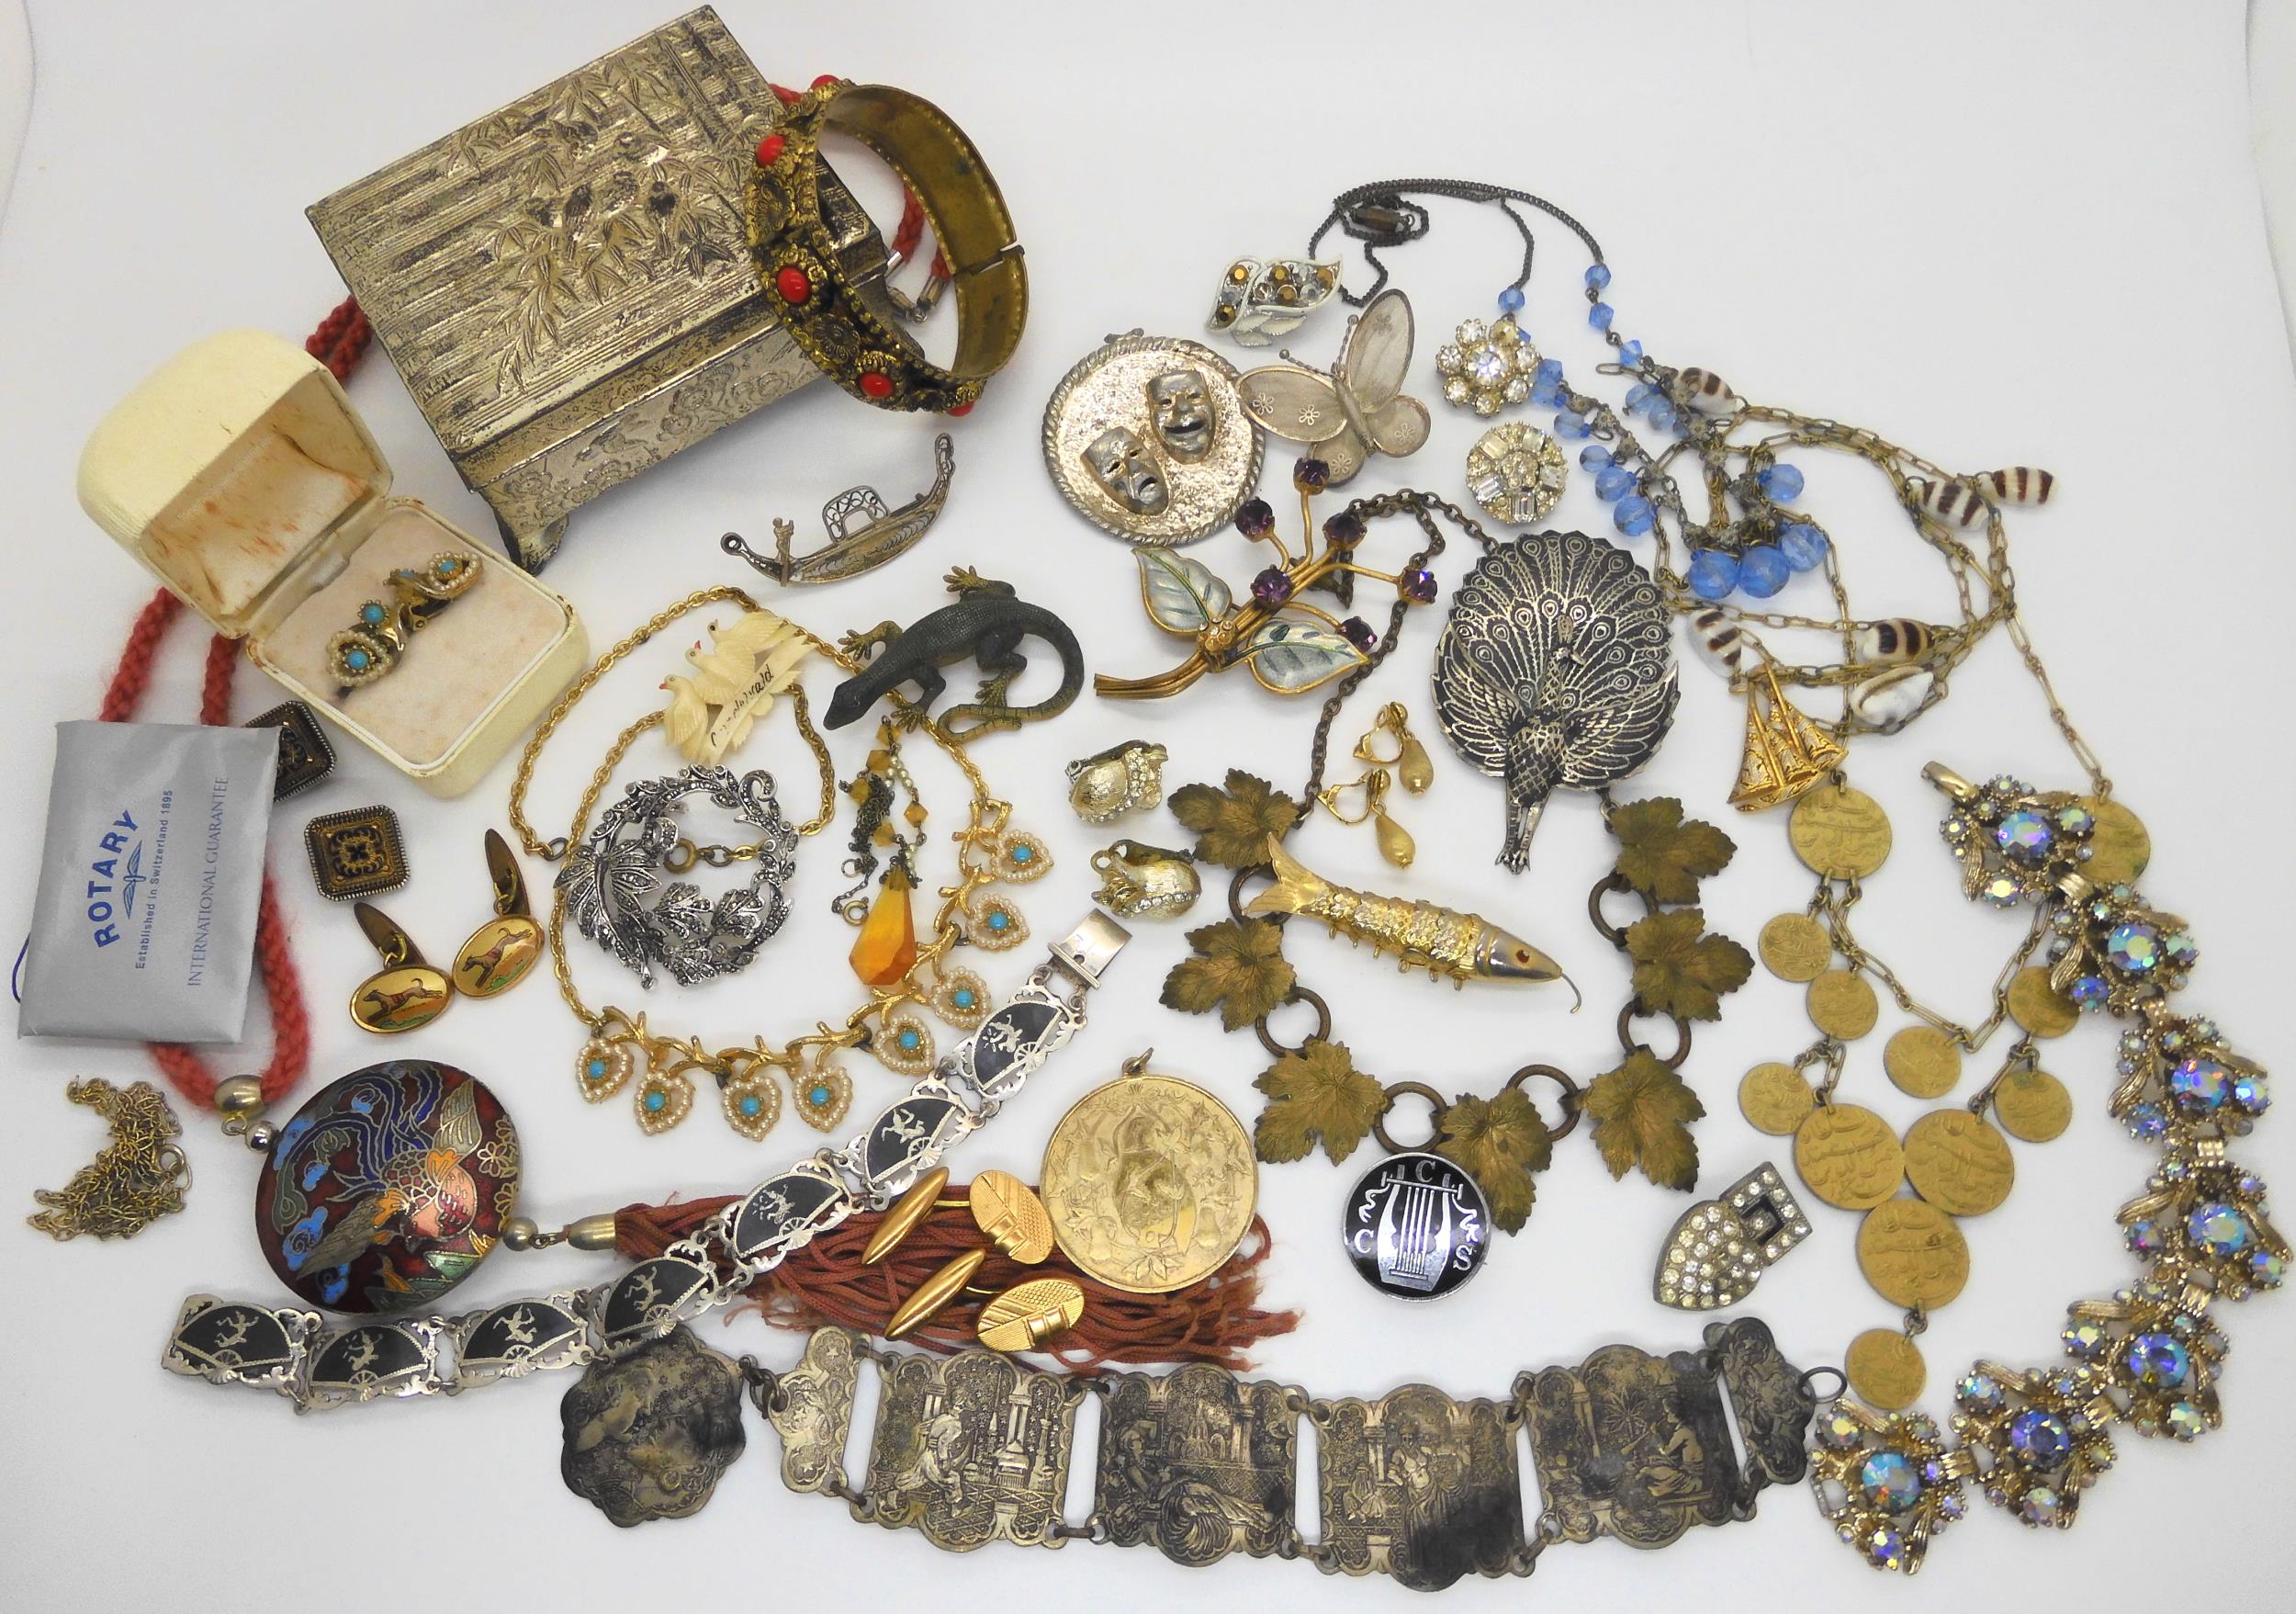 A silver gilt 'Partridge in a pear tree' pendant, a Siam wear peacock brooch and other items